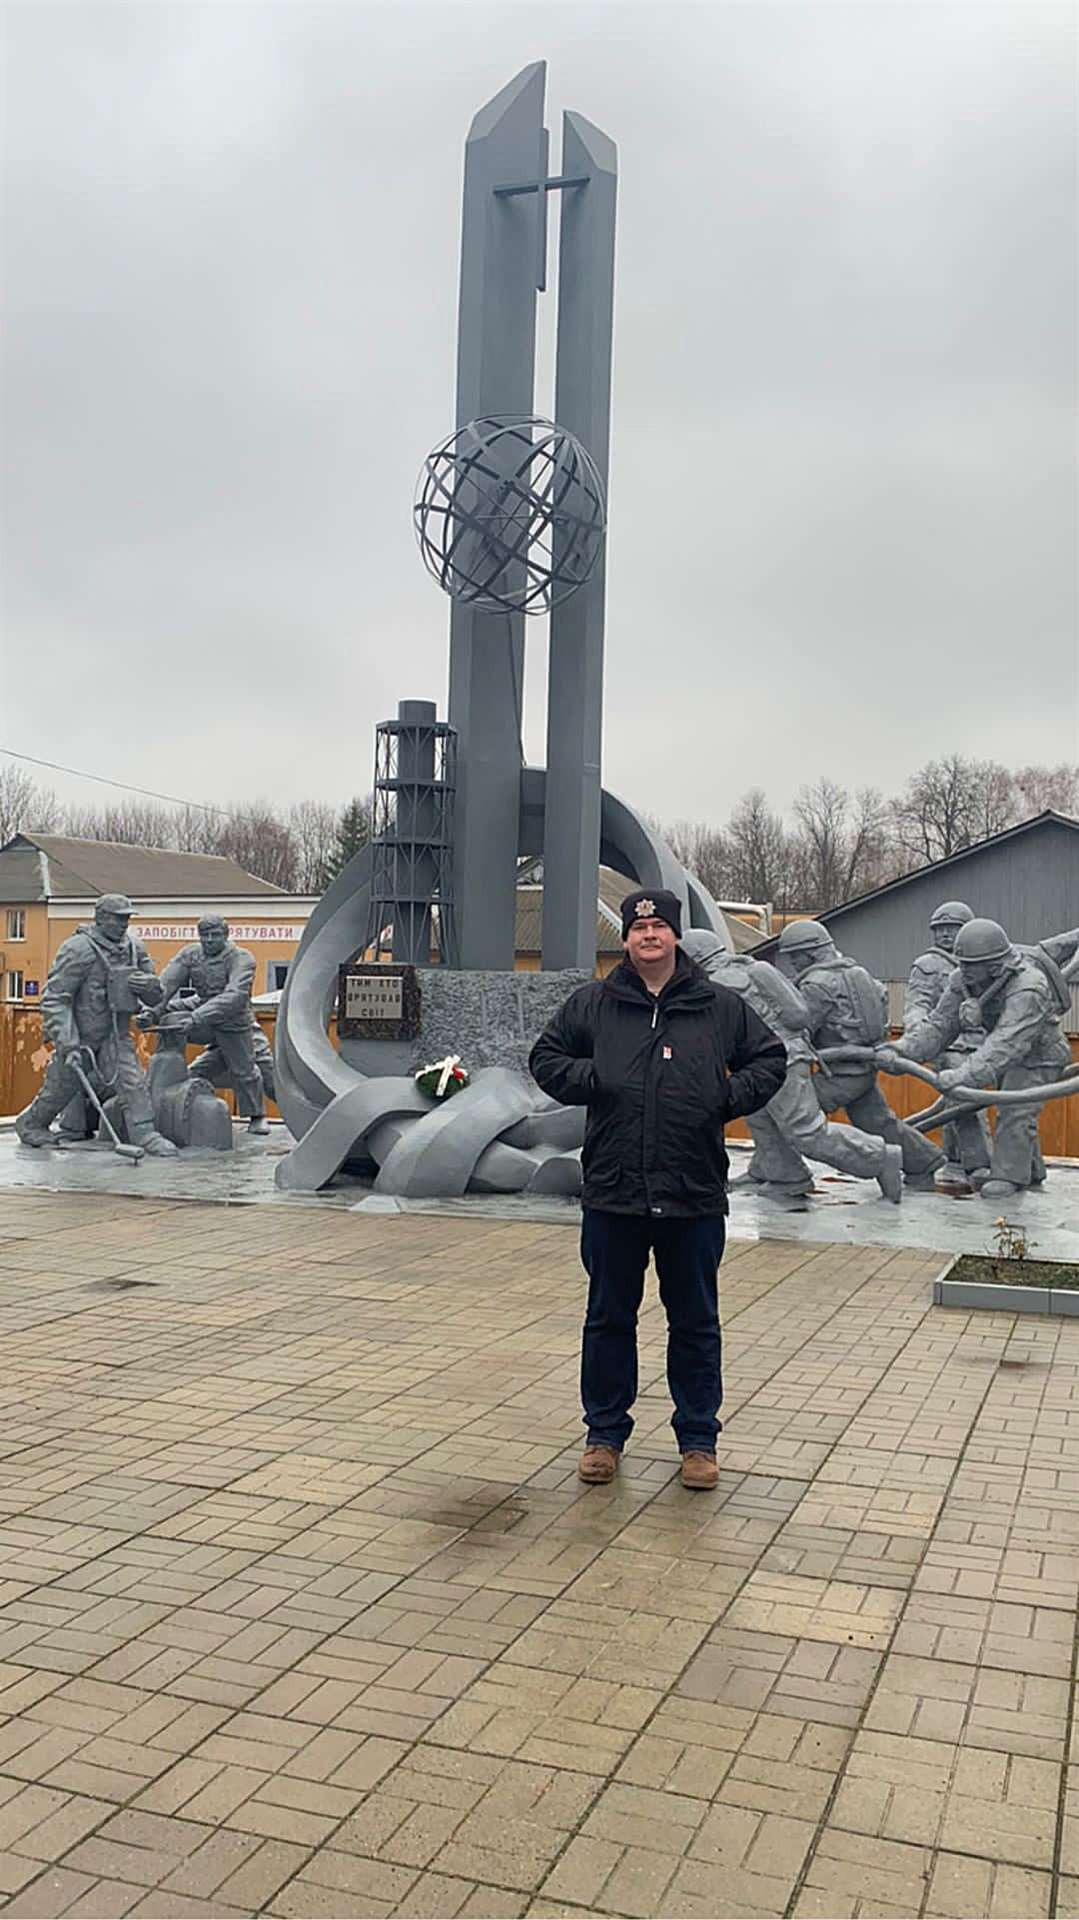 Mark Allan at "The men who saved the world statue" outside a fire station in Chernobyl.